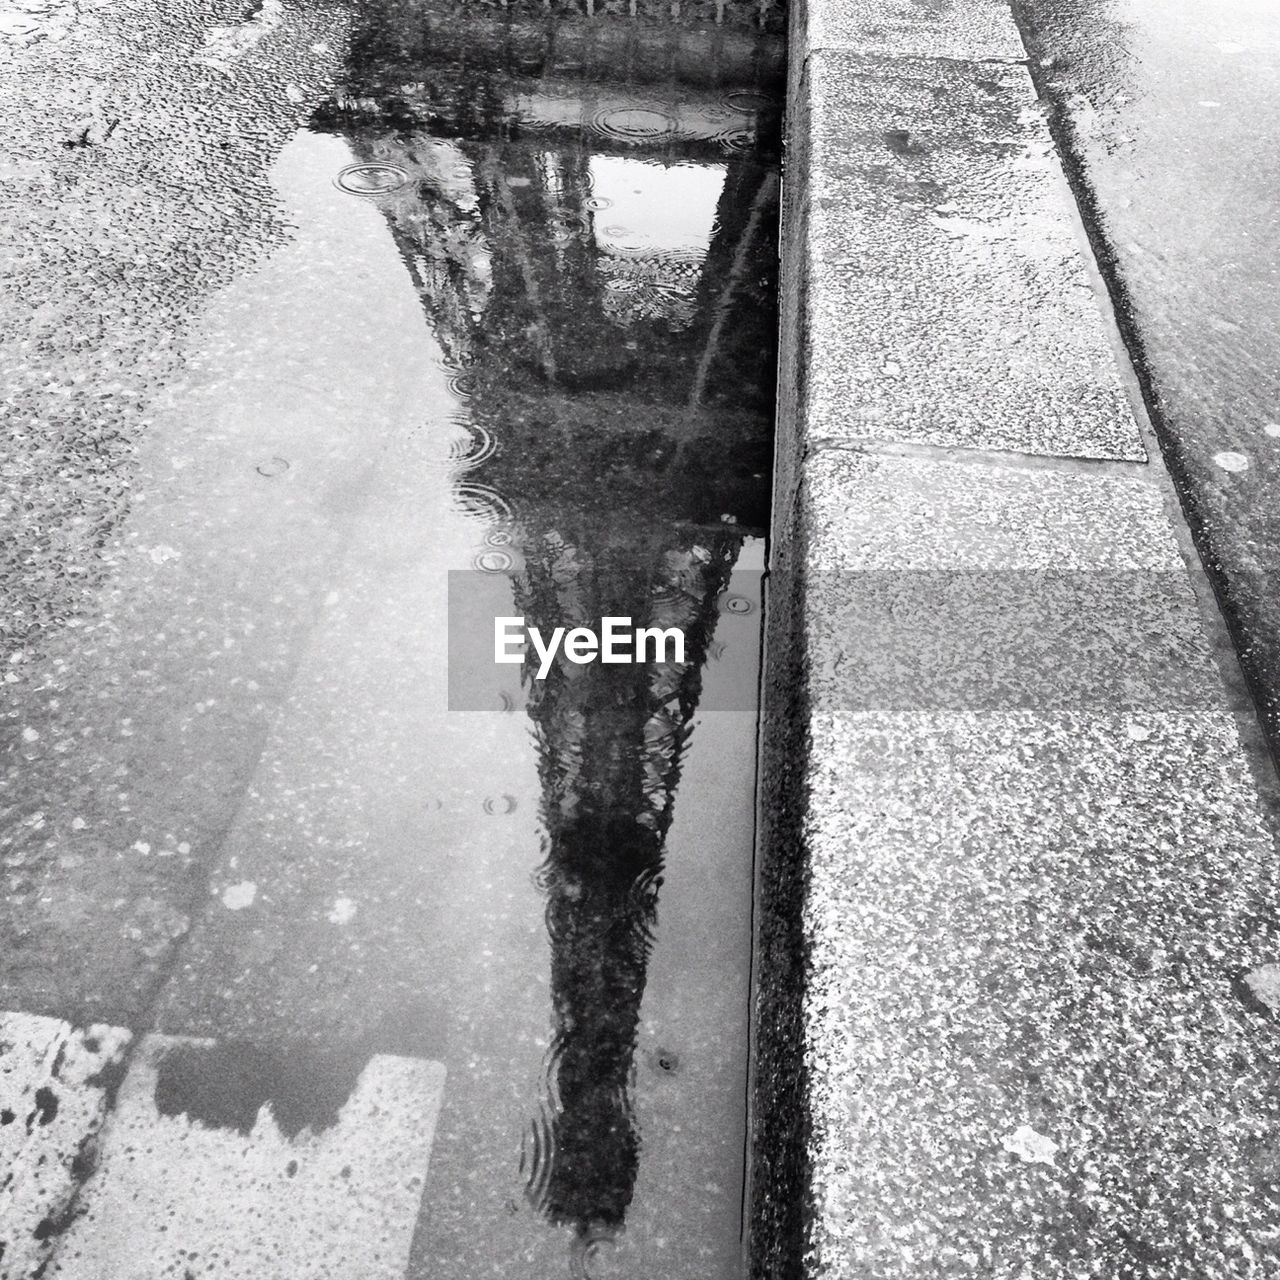 Reflection of eiffel tower in puddle on street during rainy season